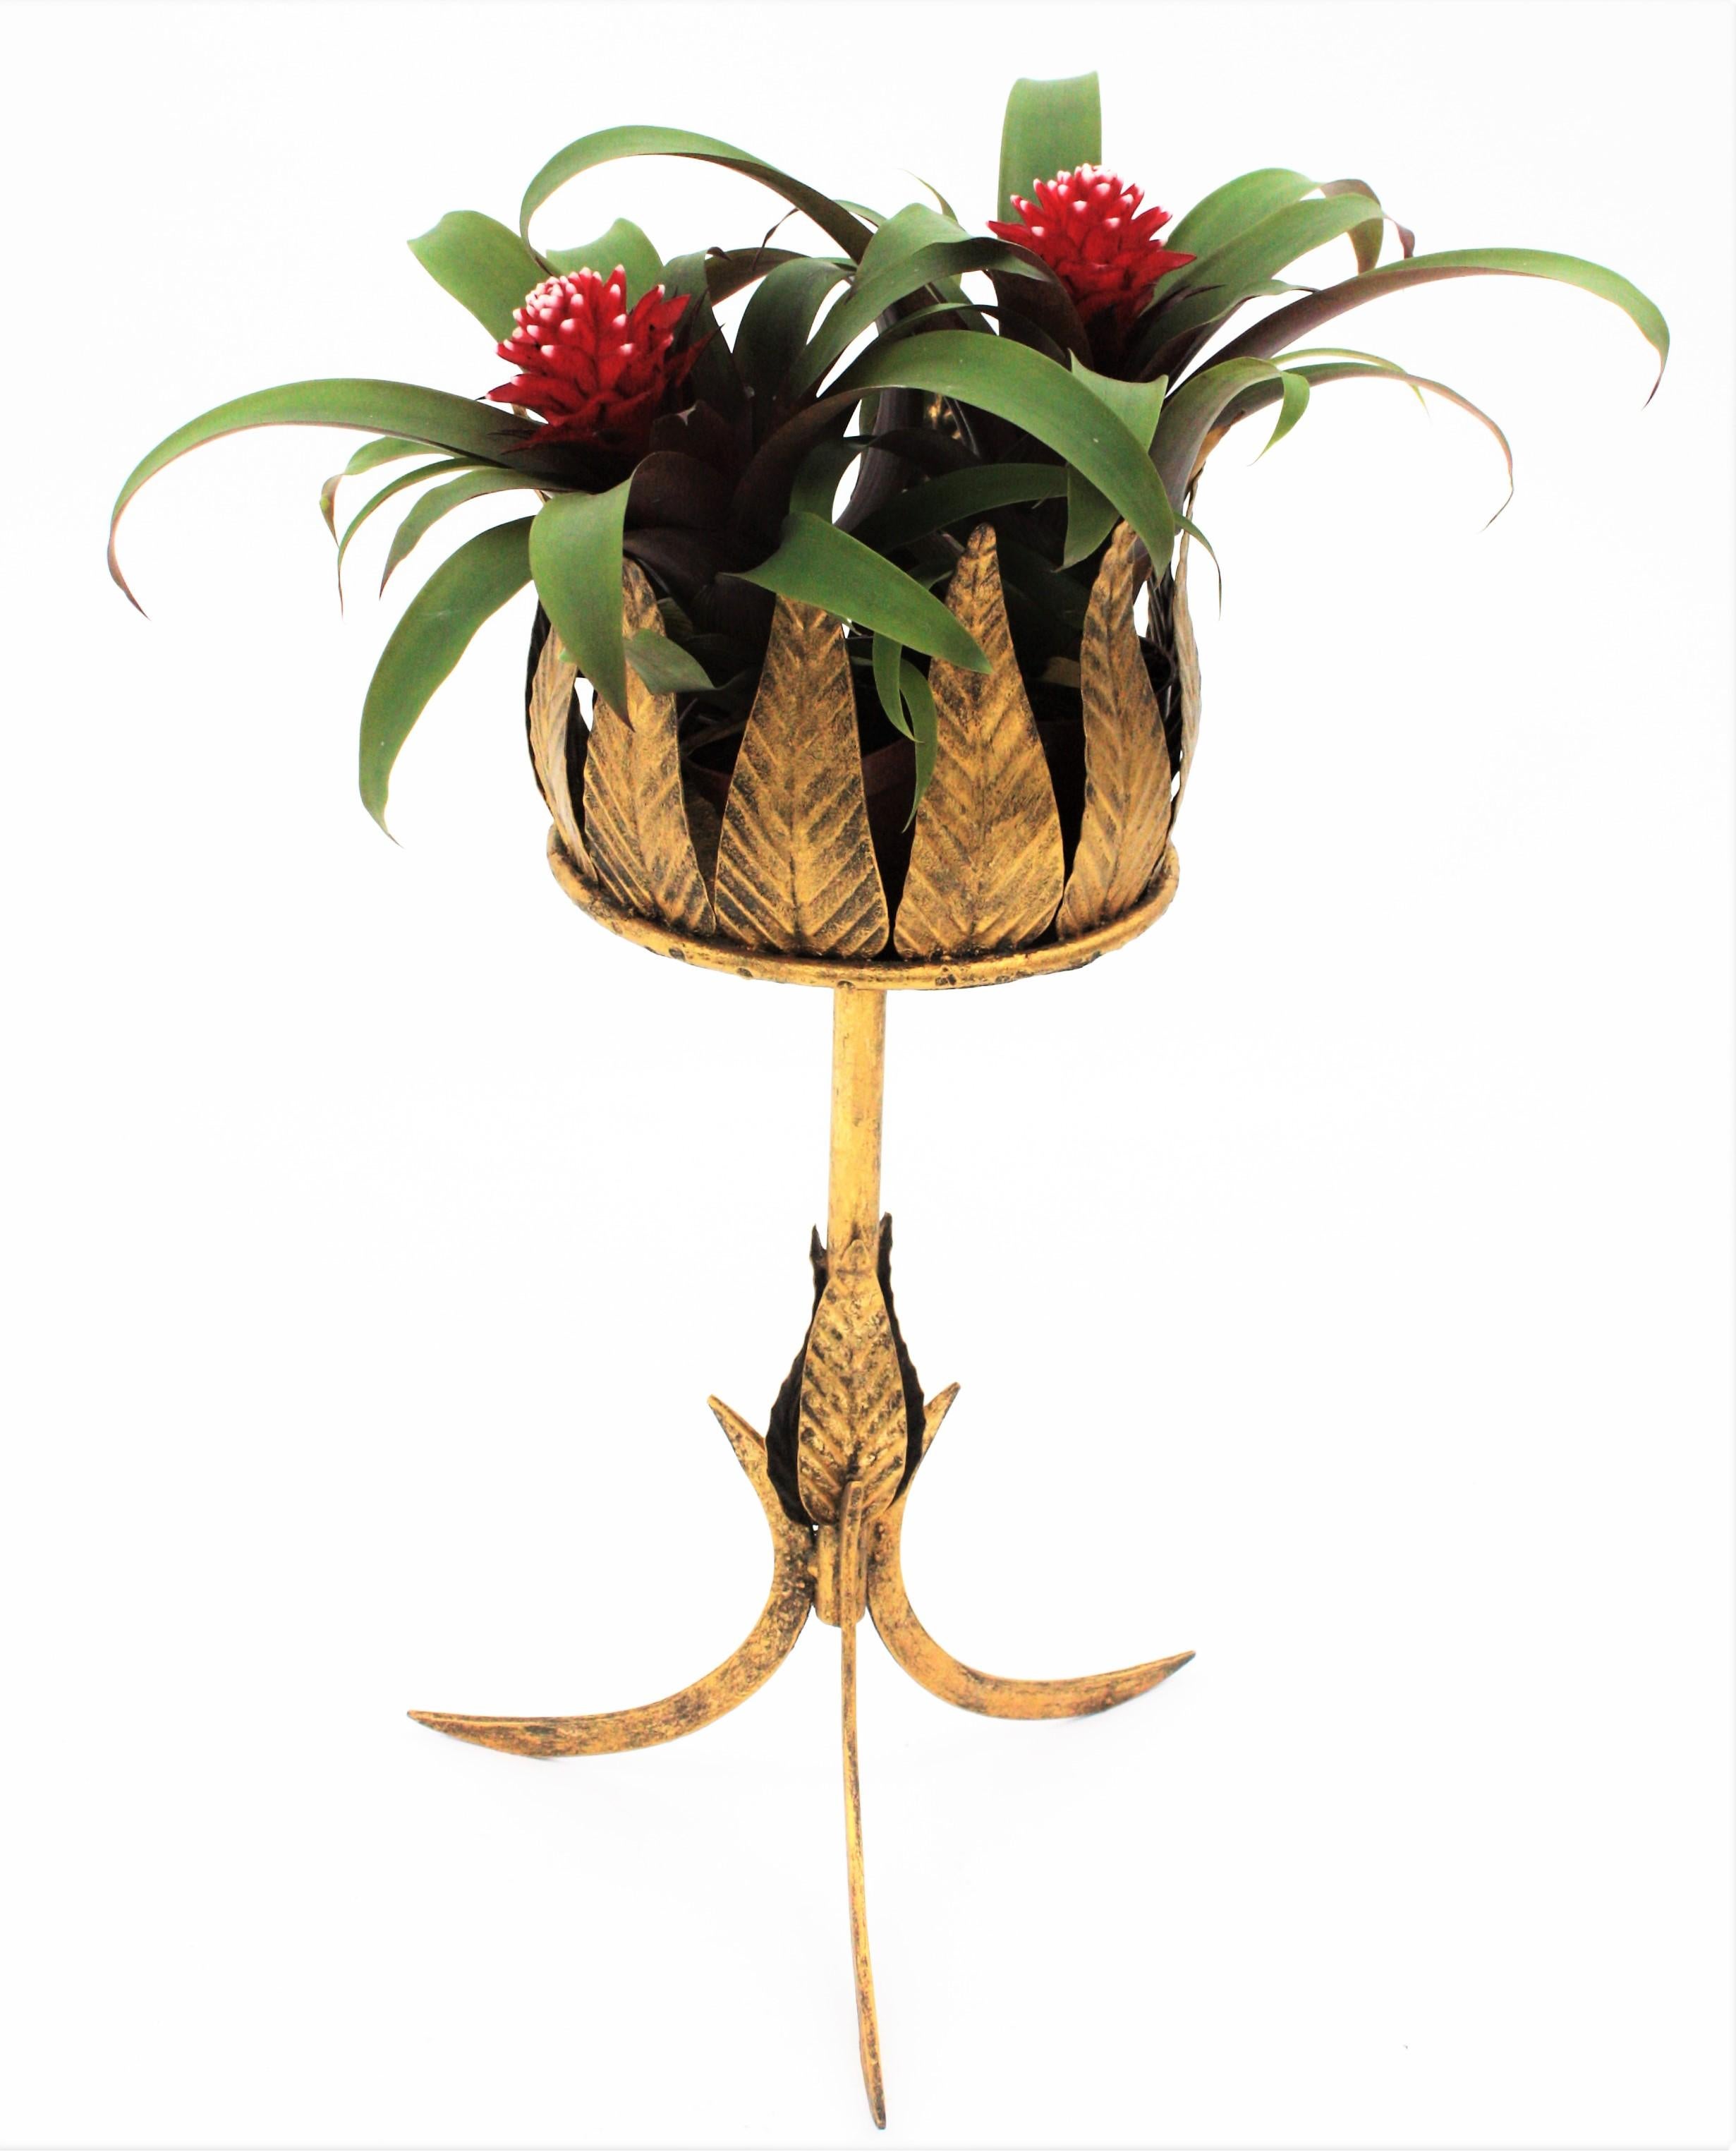 Mid-Century Modern Gilt Metal Leafed Drinks Stand or Planter on a Tripod Base, Spain, 1950s